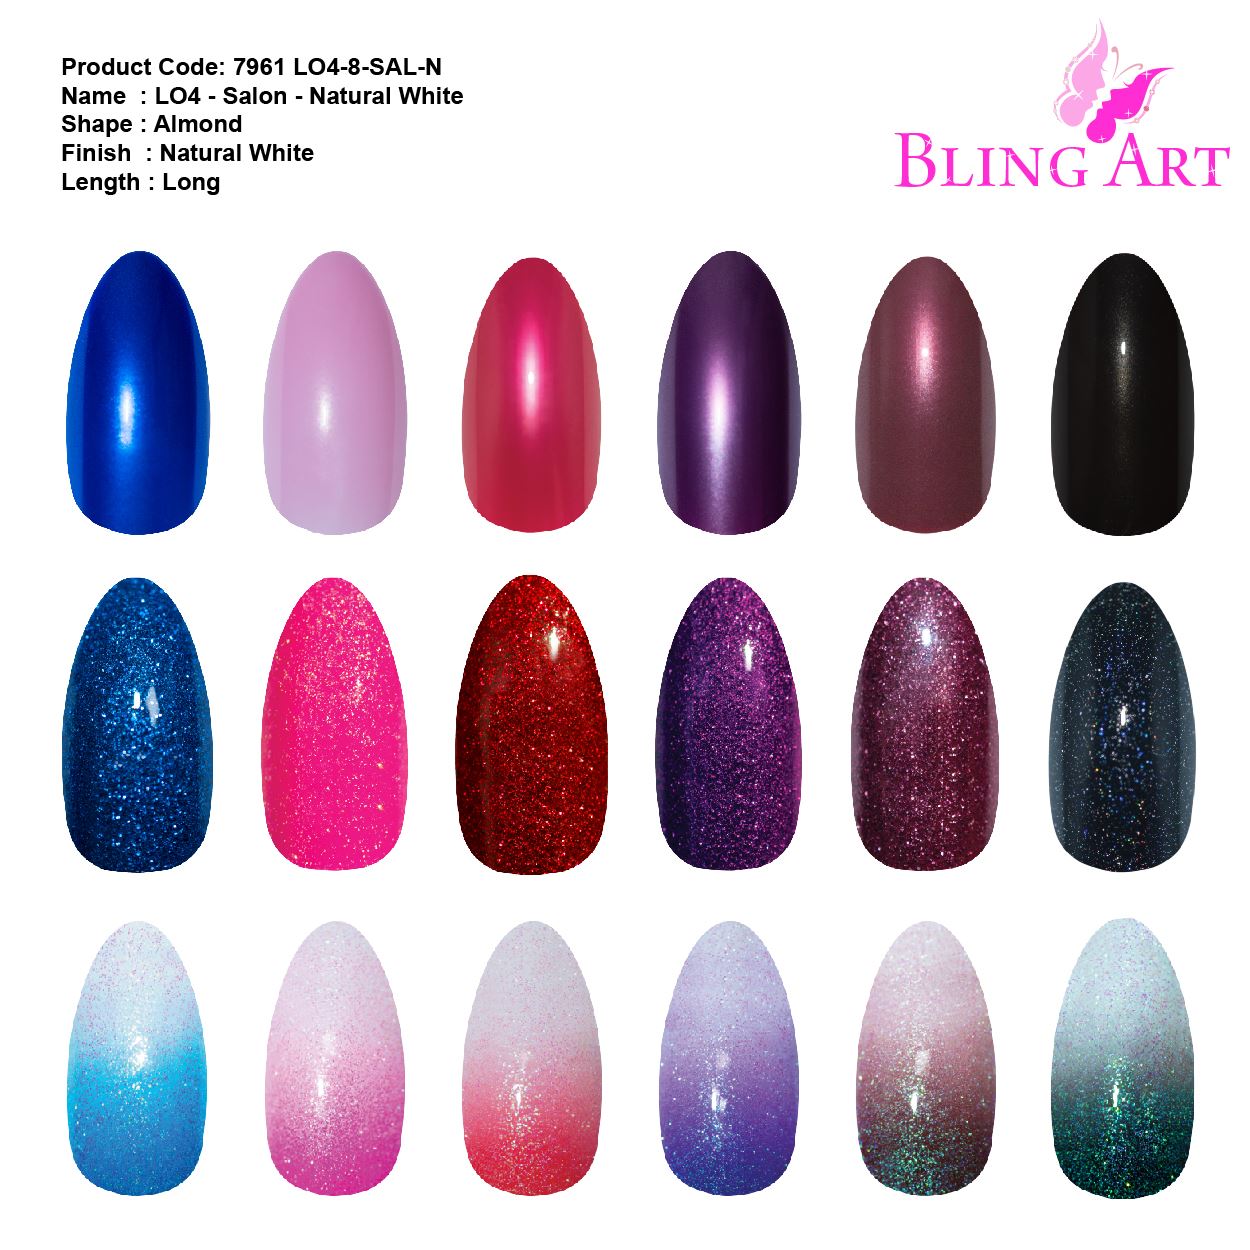 False Nails by Bling Art 360 Stiletto Almond Long Natural Acrylic Fake Nail Tips without glue